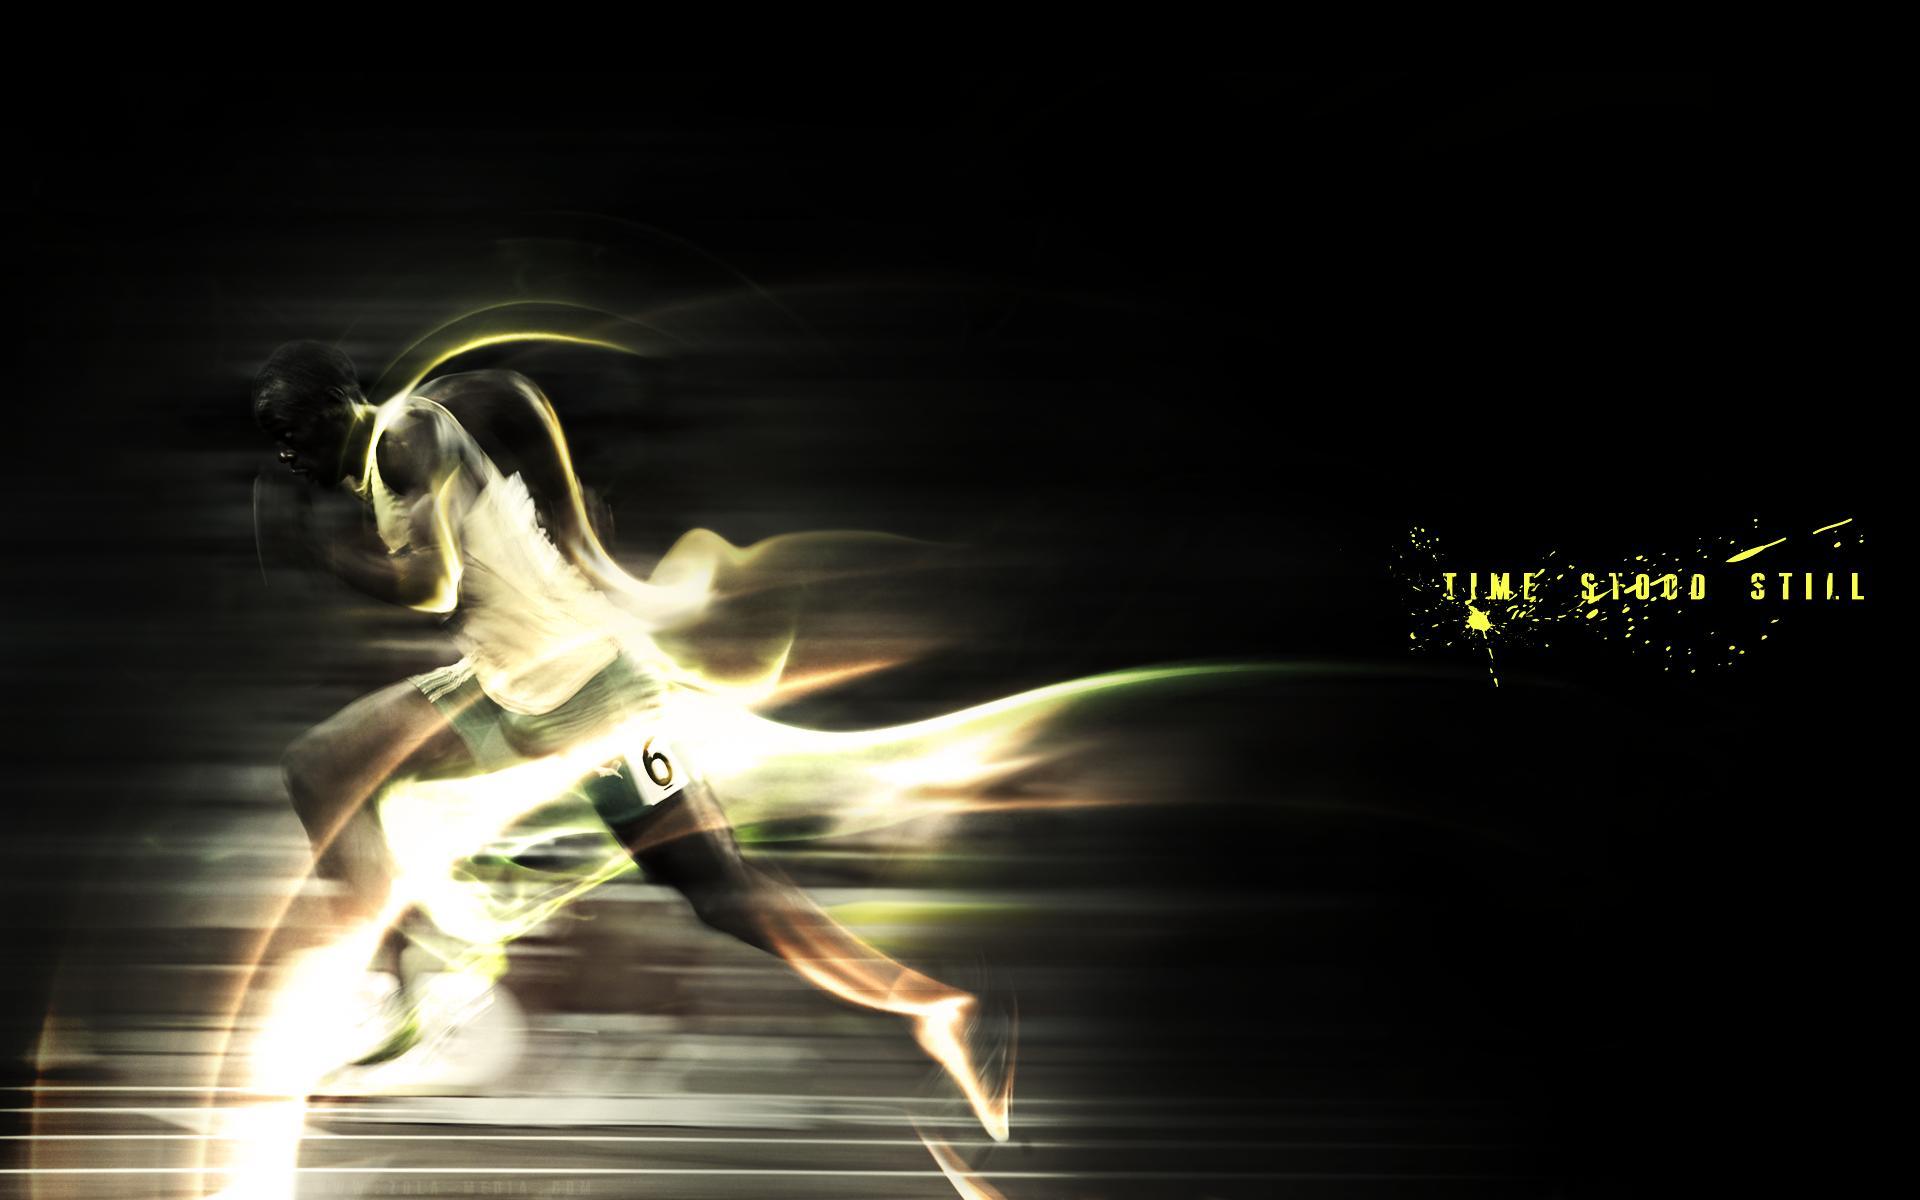 At a world record of 27.44mph, Usain Bolt epitomizes how fast